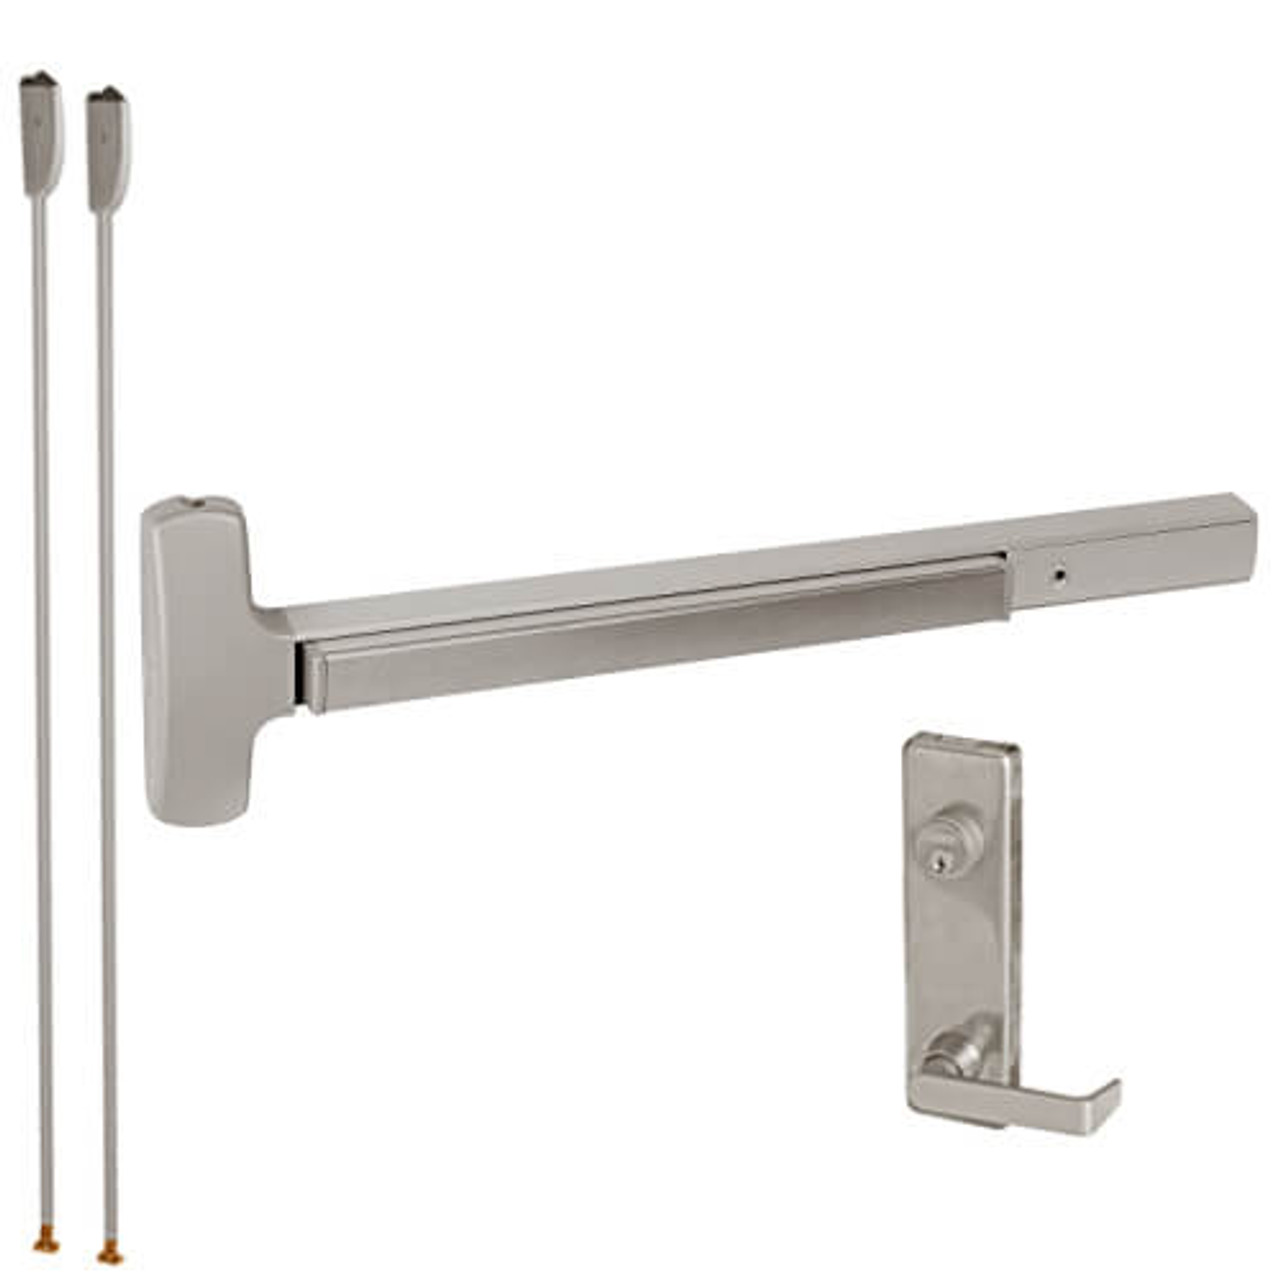 25-V-L-NL-DANE-US32D-2-RHR Falcon Exit Device in Satin Stainless Steel